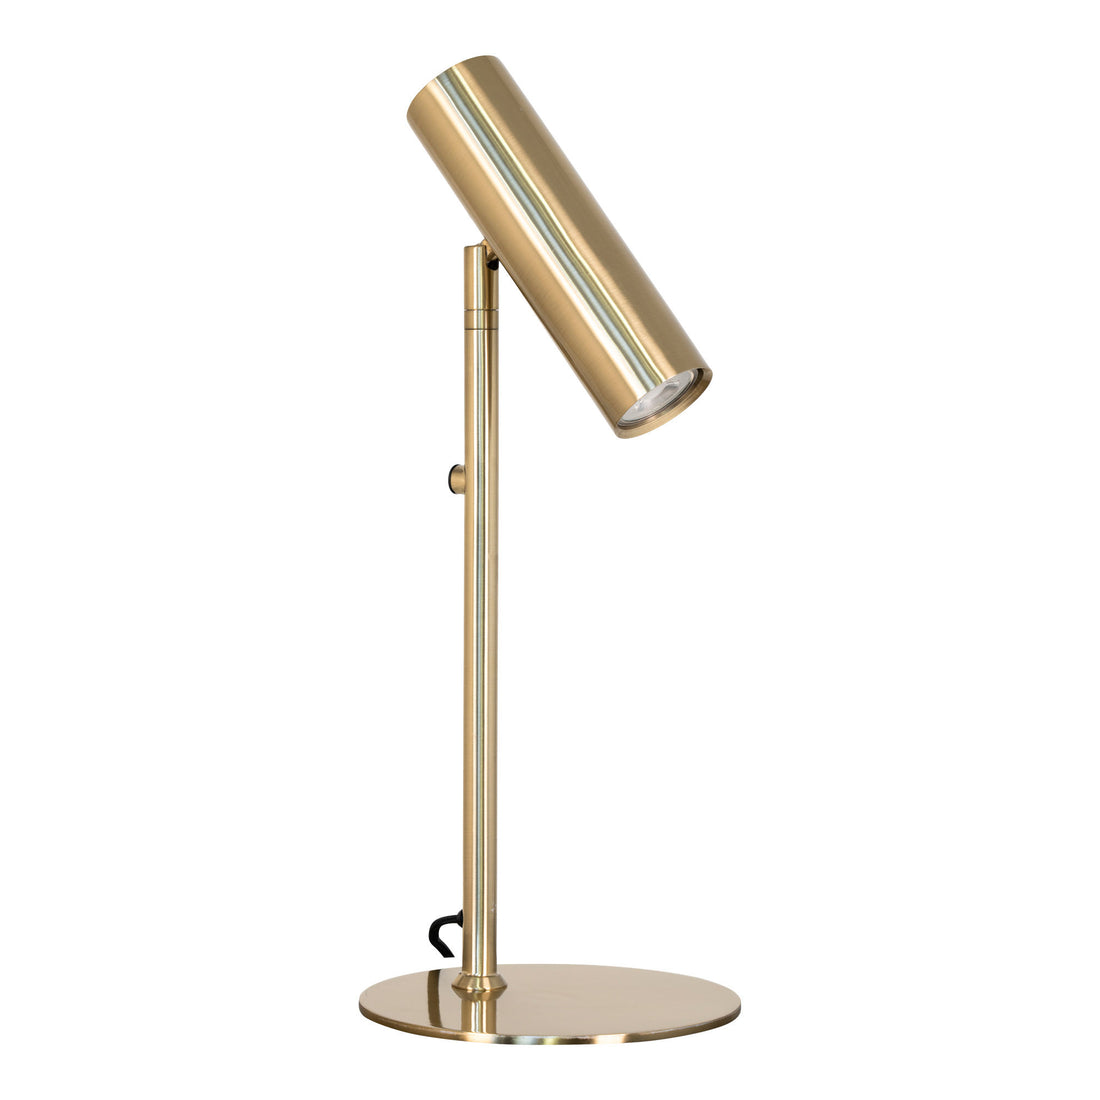 Paris Table lamp - Lamp in brass with fabric cord of 200 cm Pear: GU10/5W LED IP20 - 1 - pcs